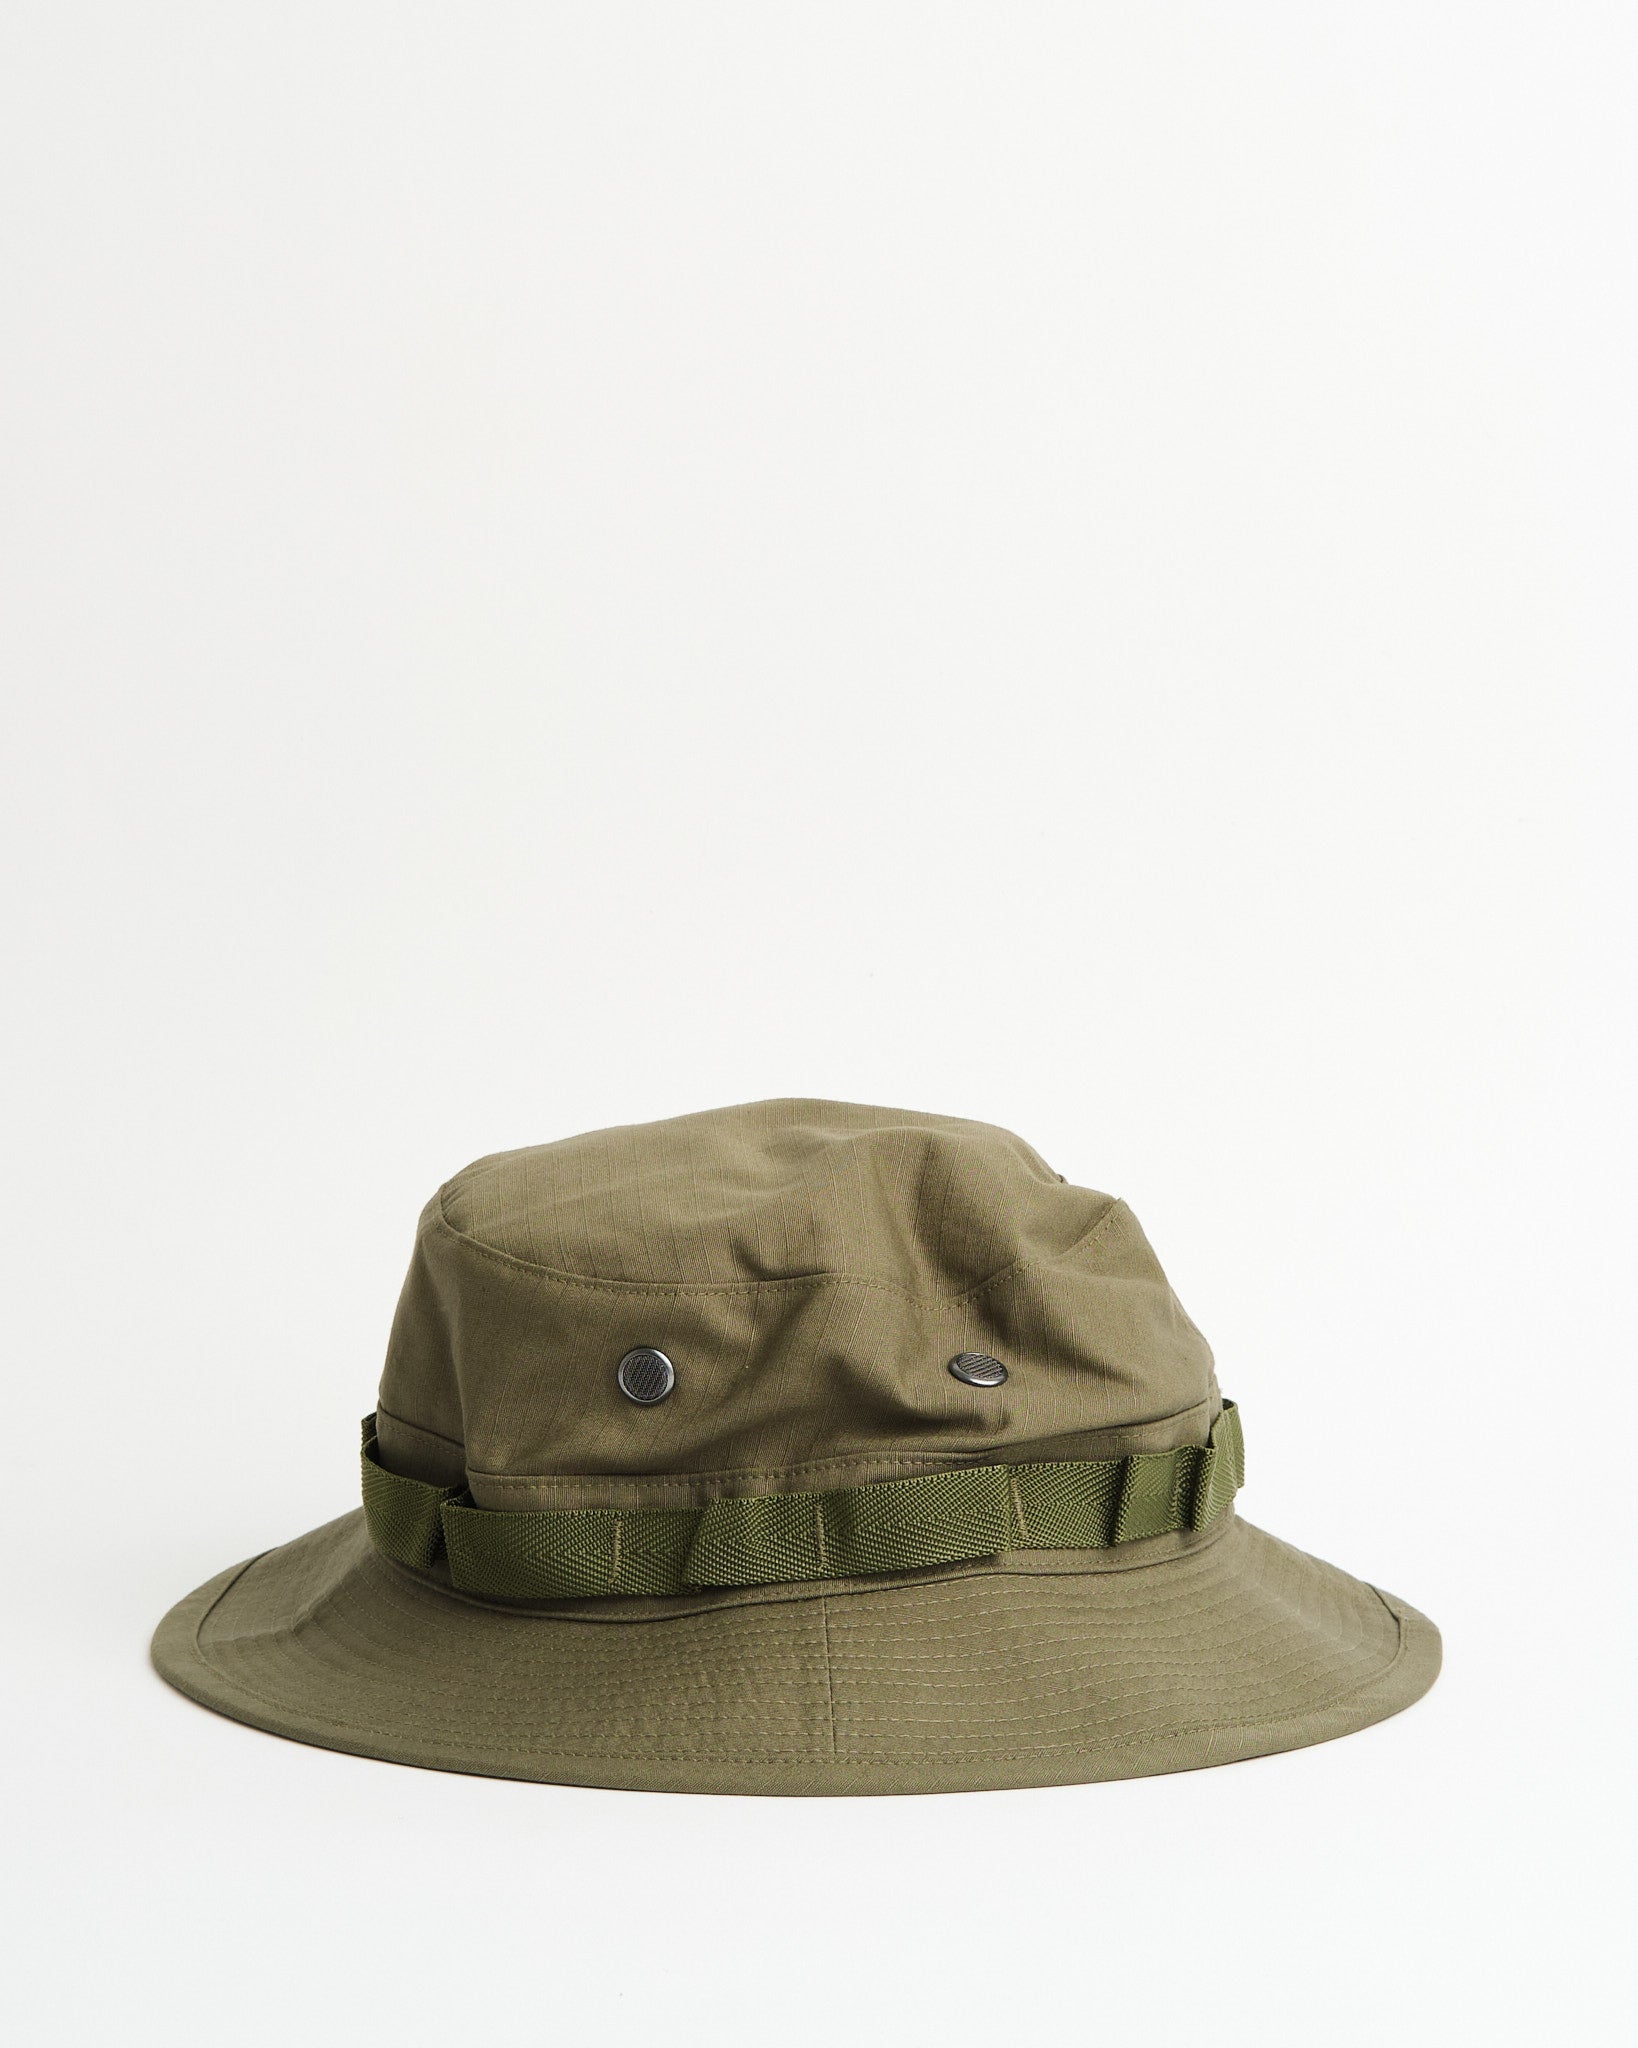 US ARMY JUNGLE HAT RIPSTOP ARMY GREEN - Meadow